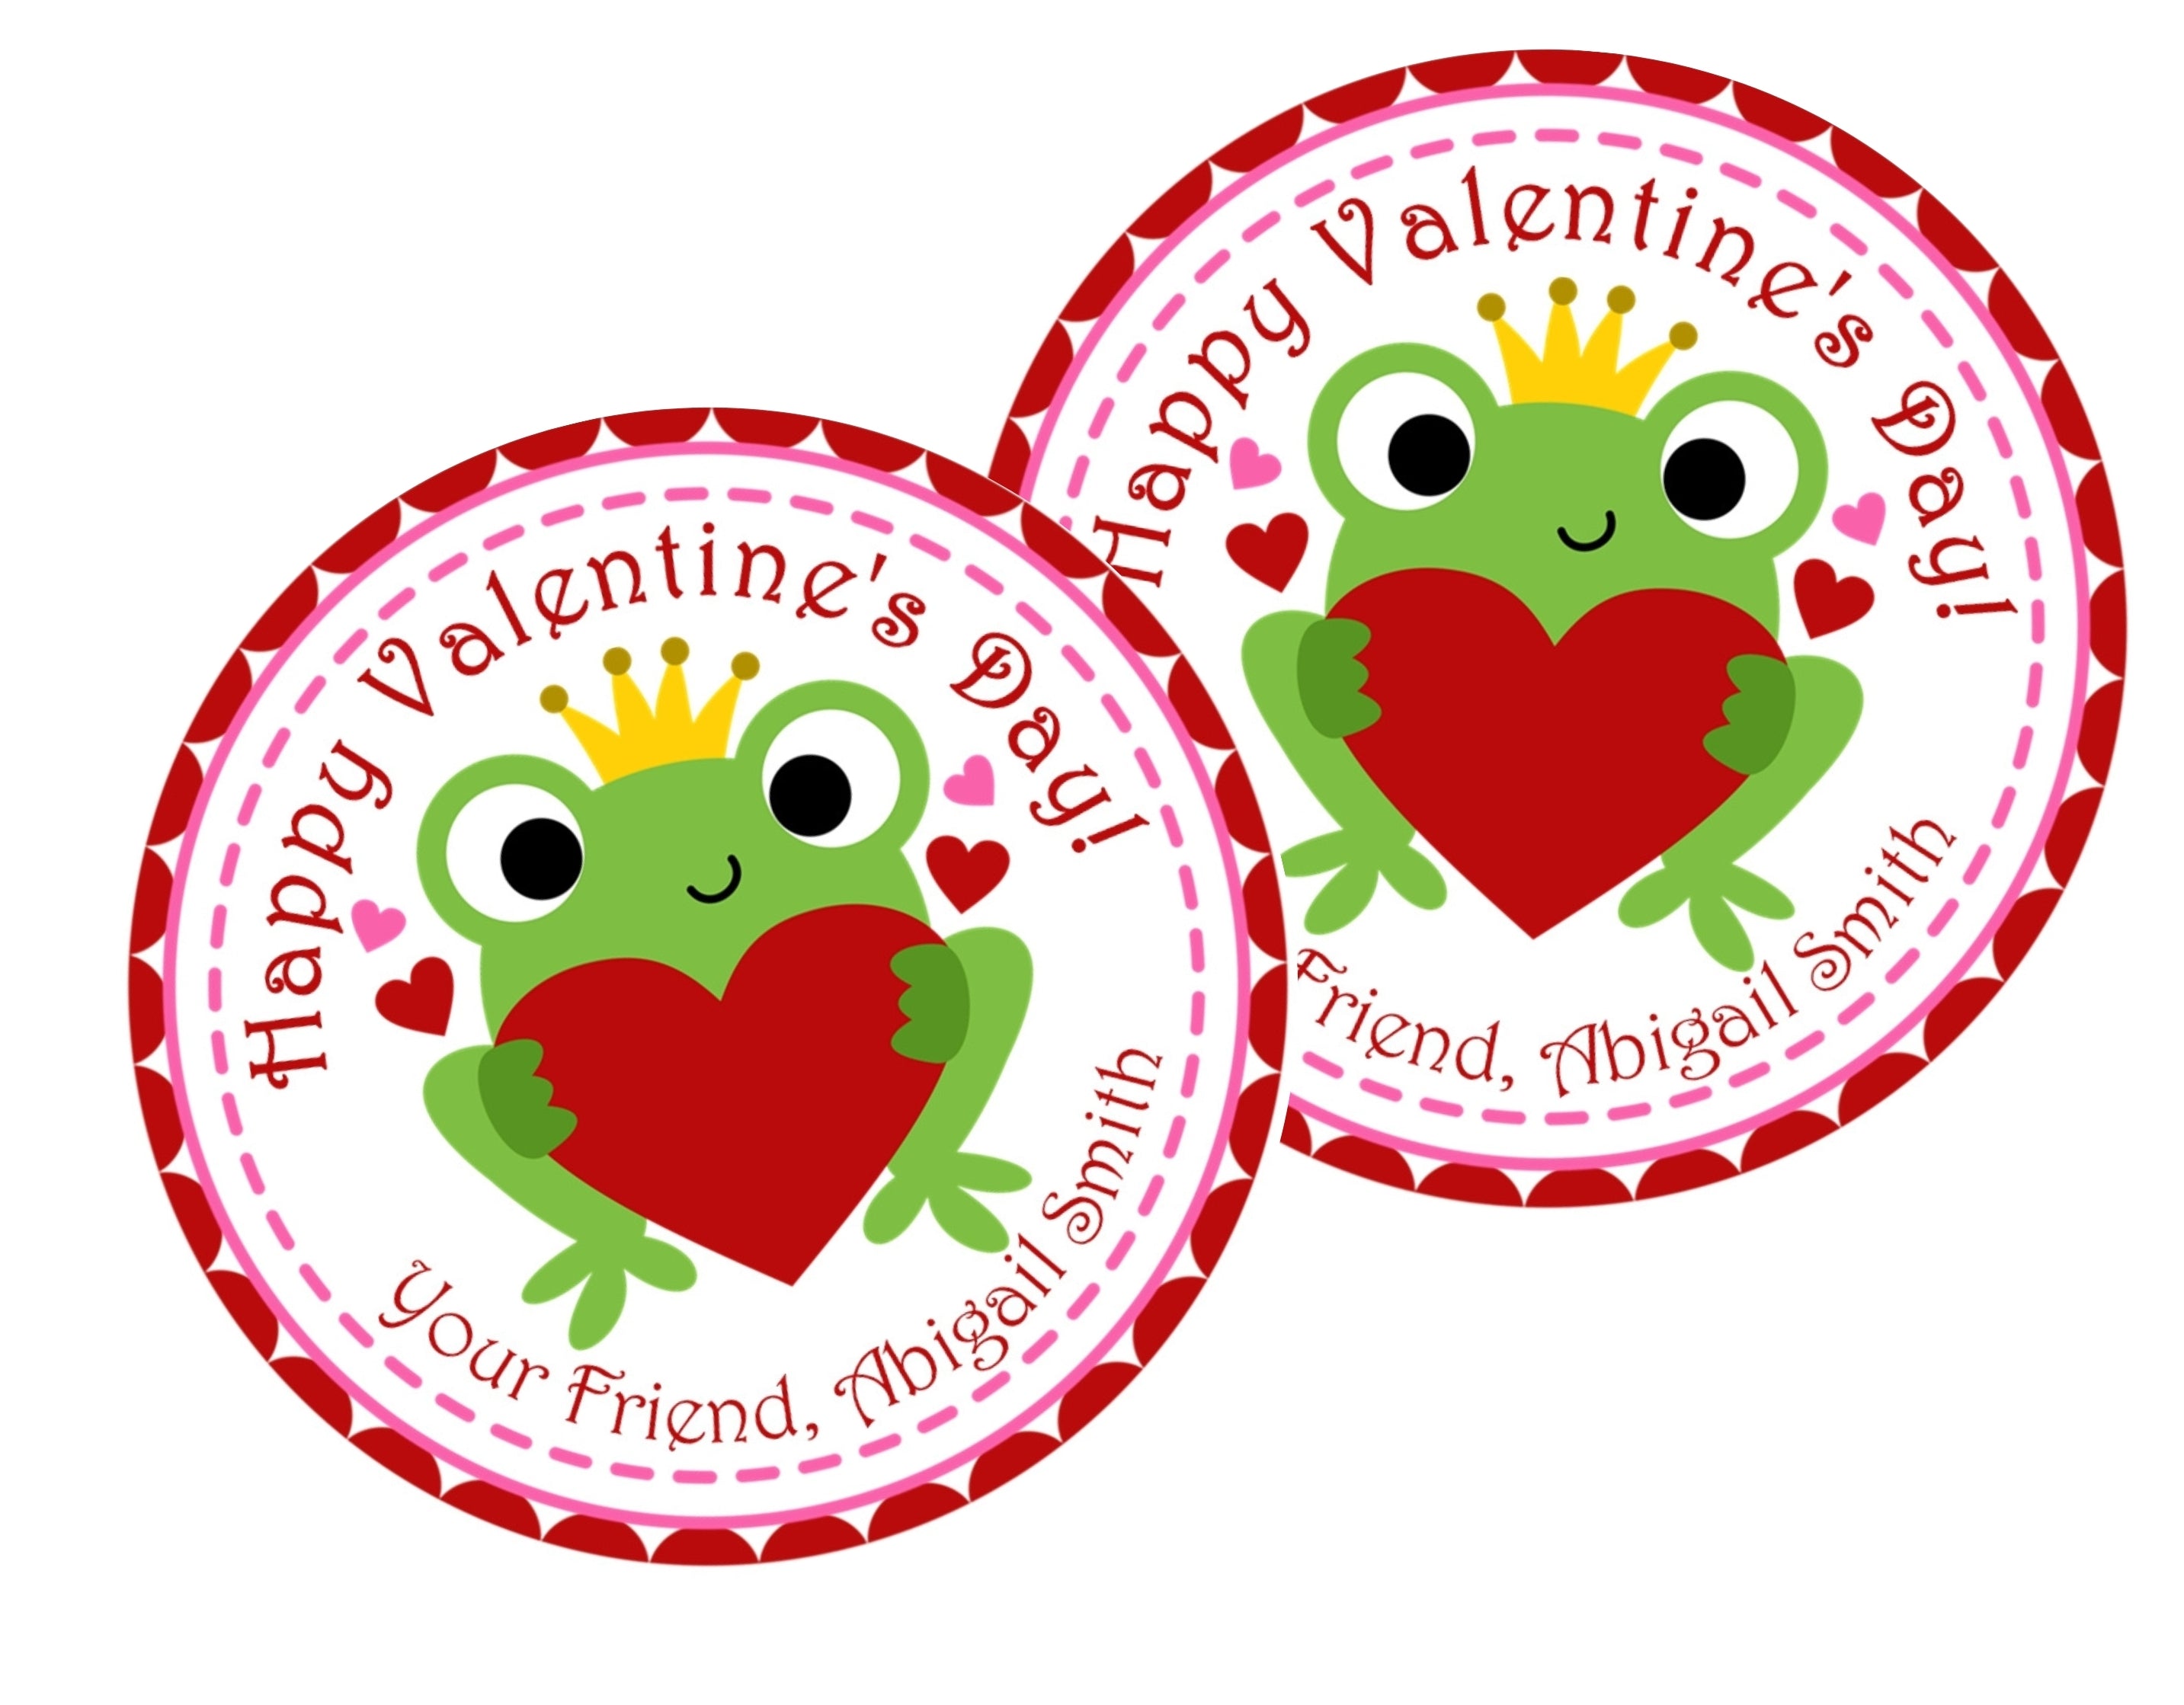 Frog Prince Valentine's Day Stickers